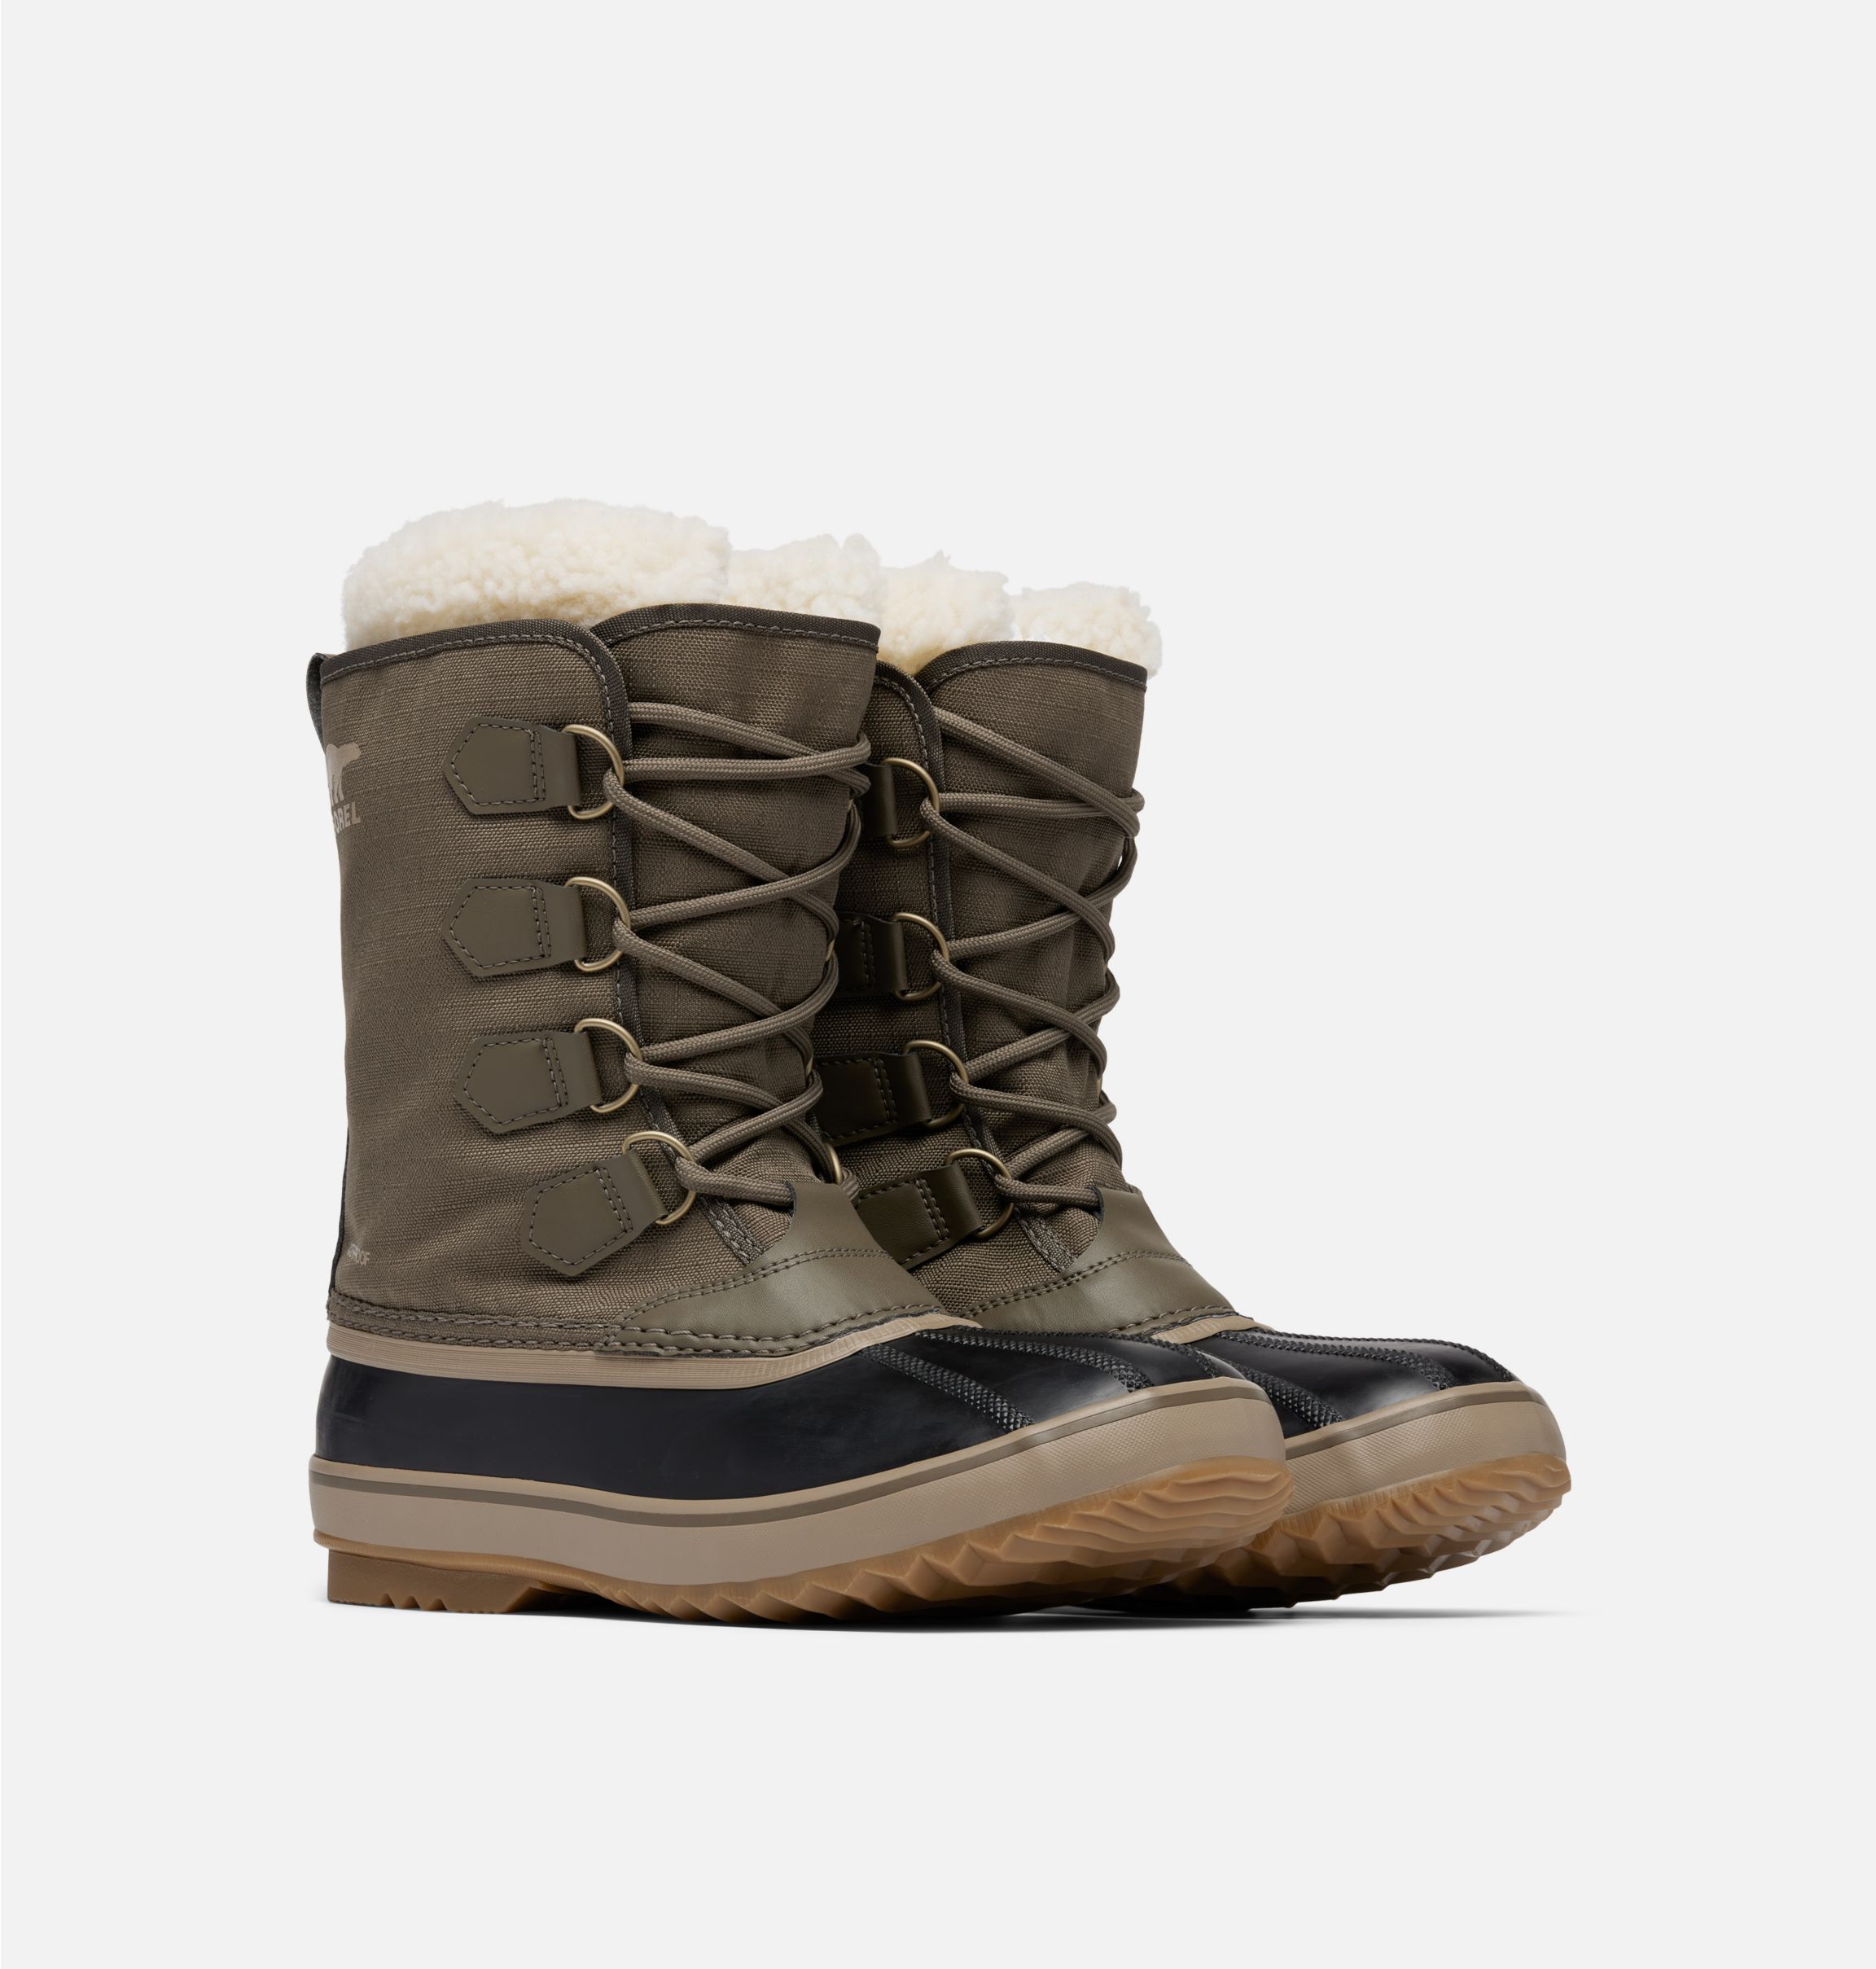 Sorel Men's 1964 Pac Nylon Boots $71.95, Women's Go Mail Run Slipper (3 colors) $35.95, Women's Whitney Frosty Lace Boots $55.95 & More + Free Shipping